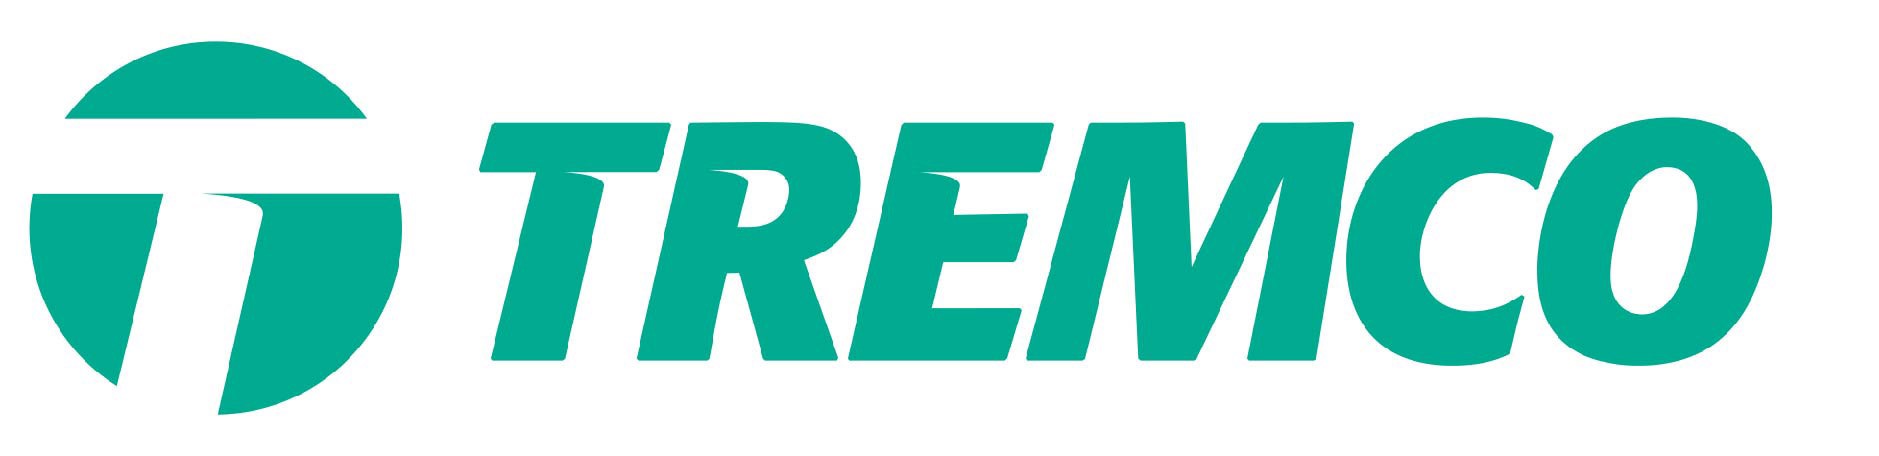 A green and white logo for the xtreme